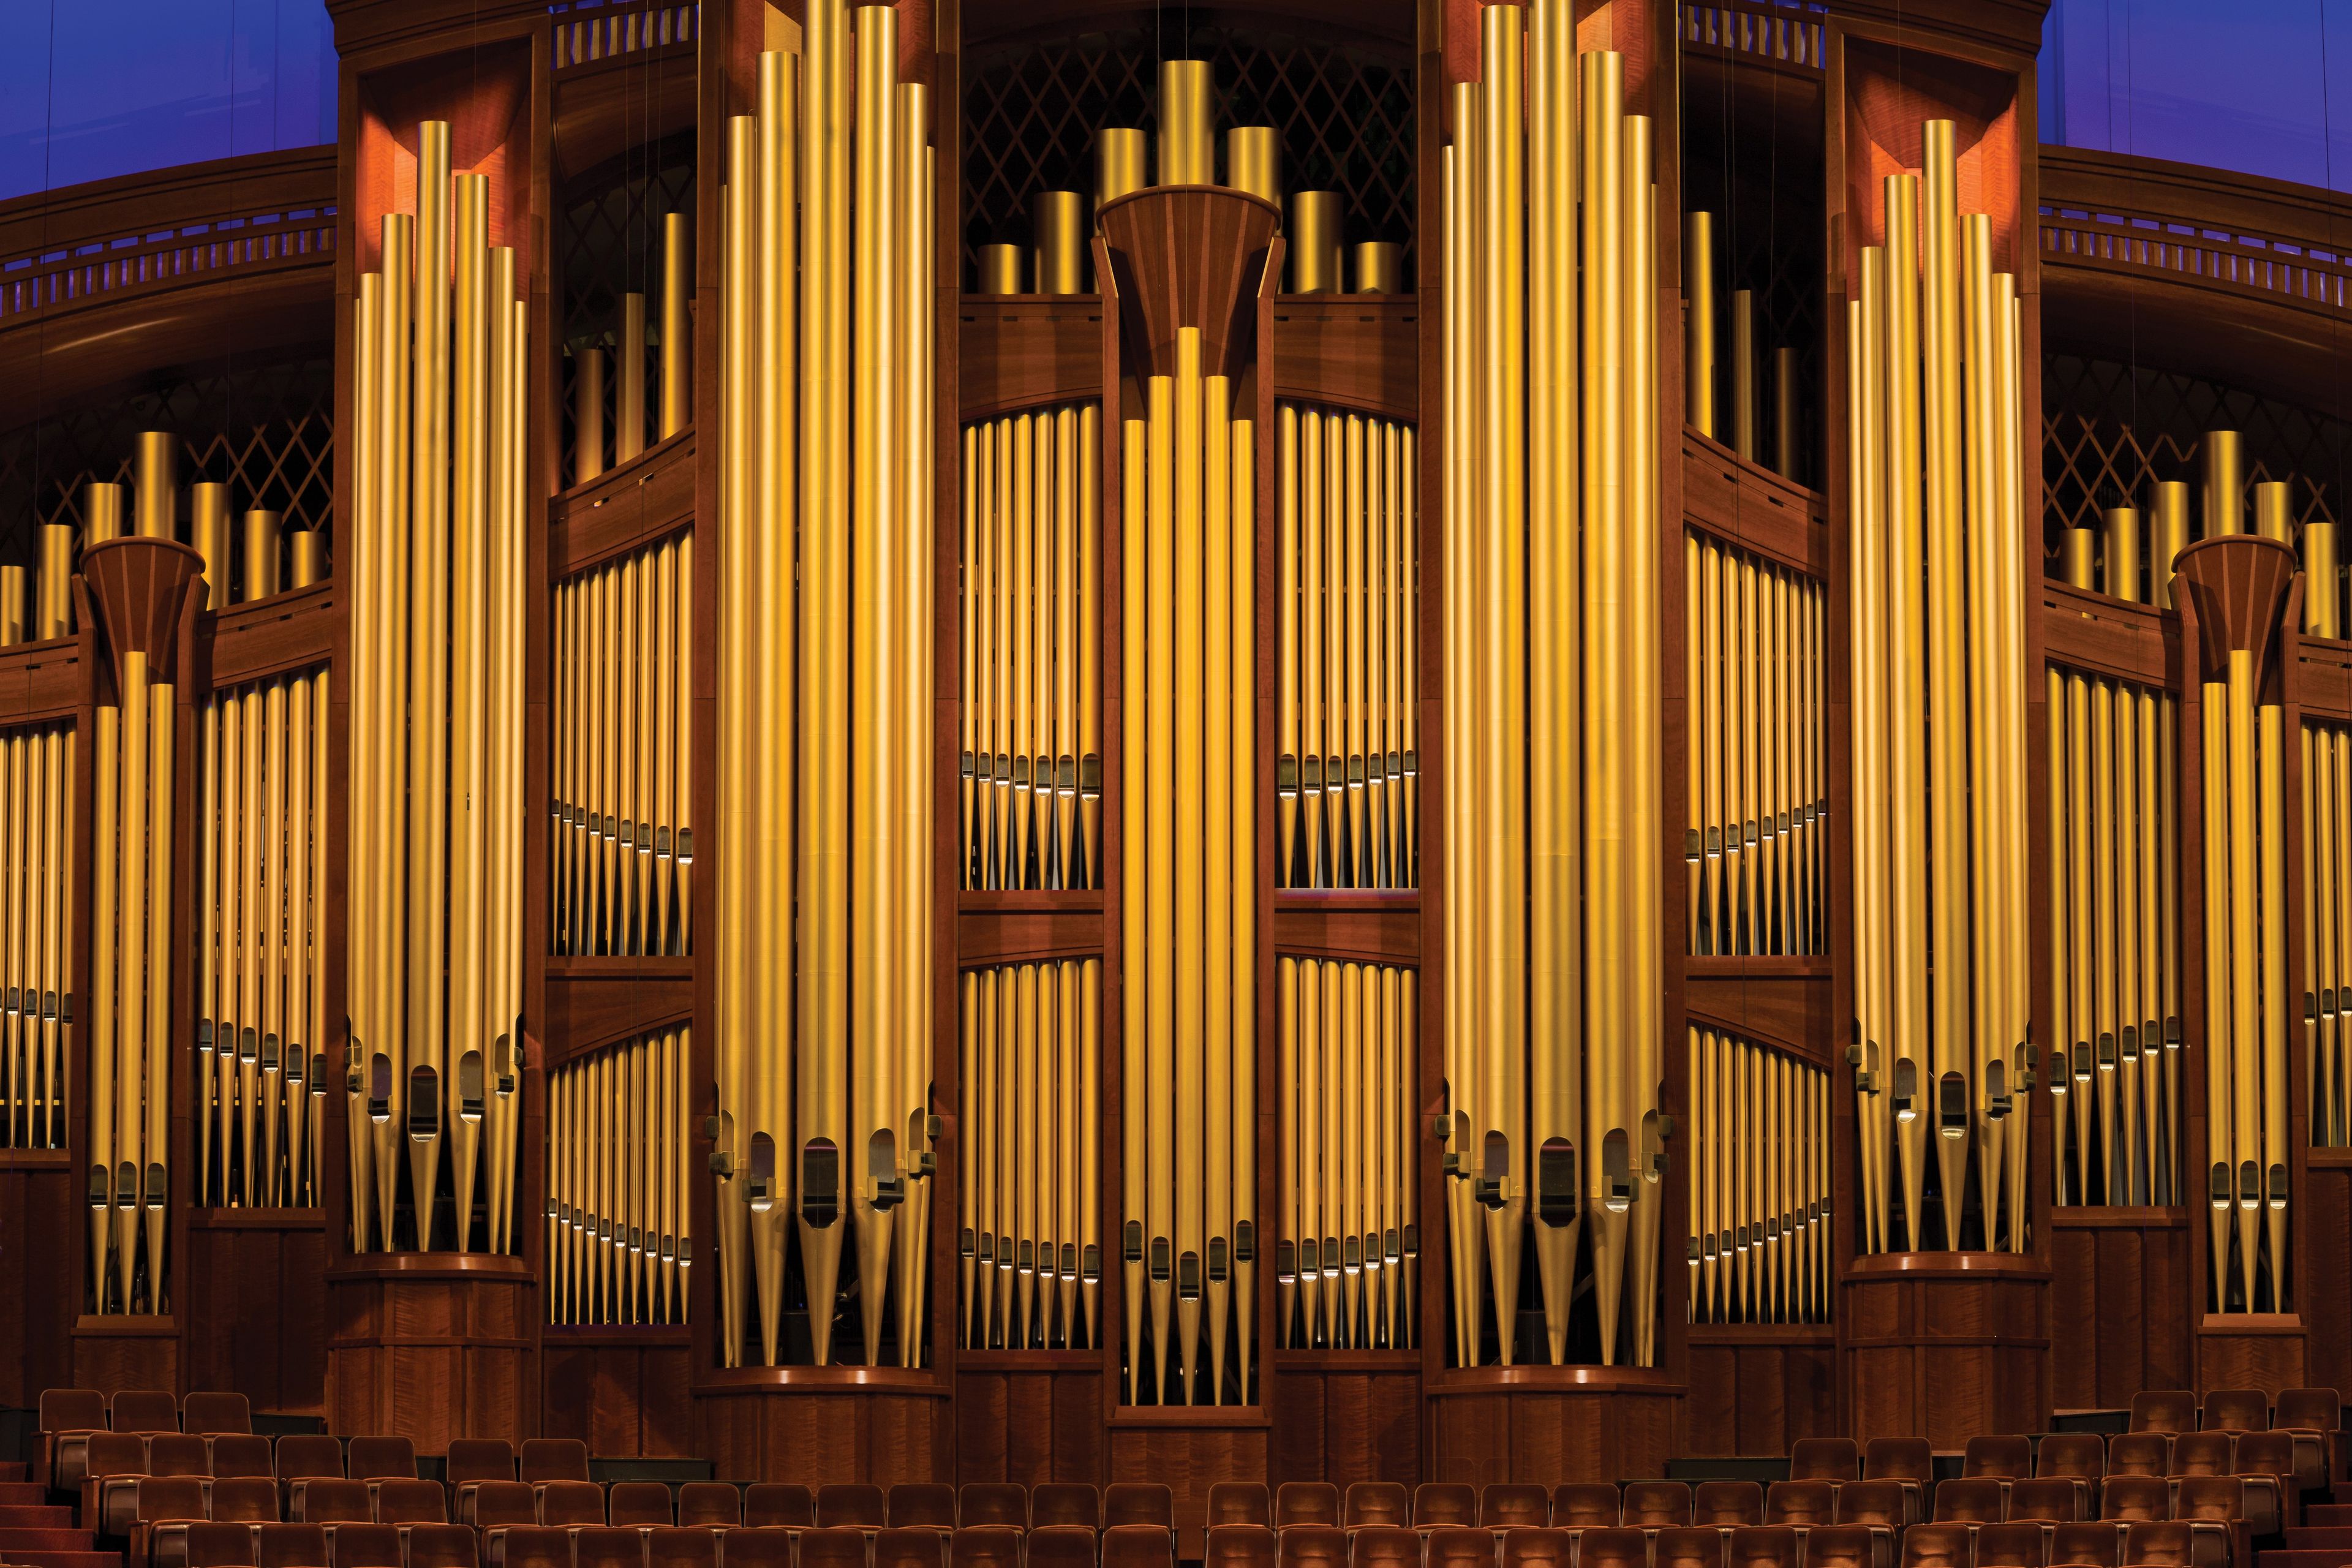 The organ pipes inside the Conference Center.